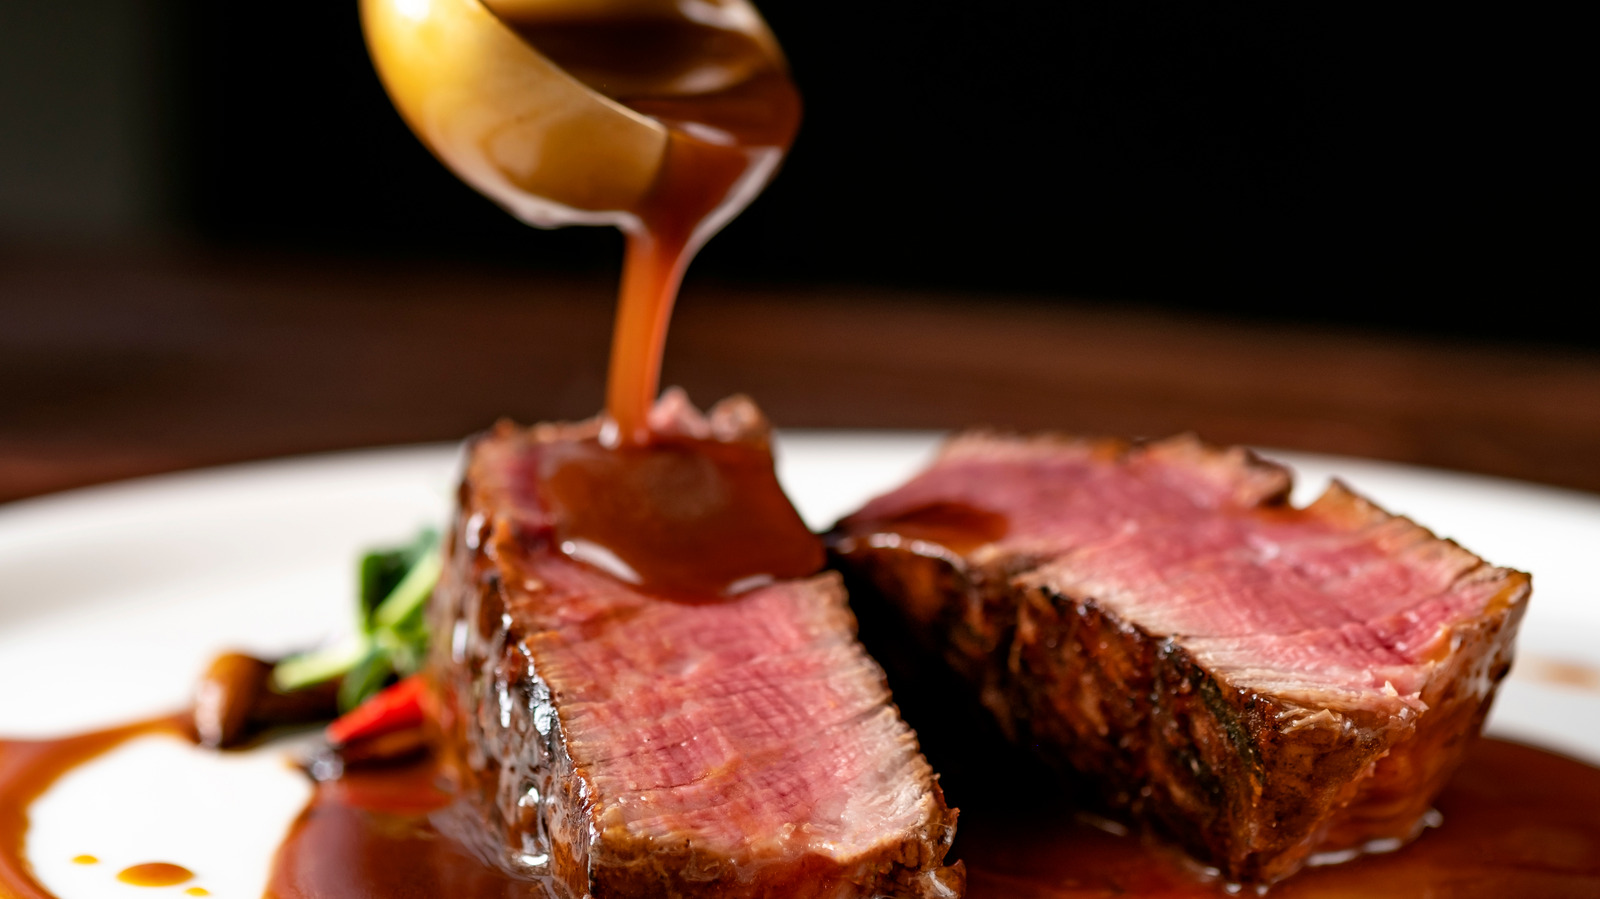 https://www.tastingtable.com/img/gallery/12-best-sauces-to-serve-with-steak/l-intro-1690303635.jpg